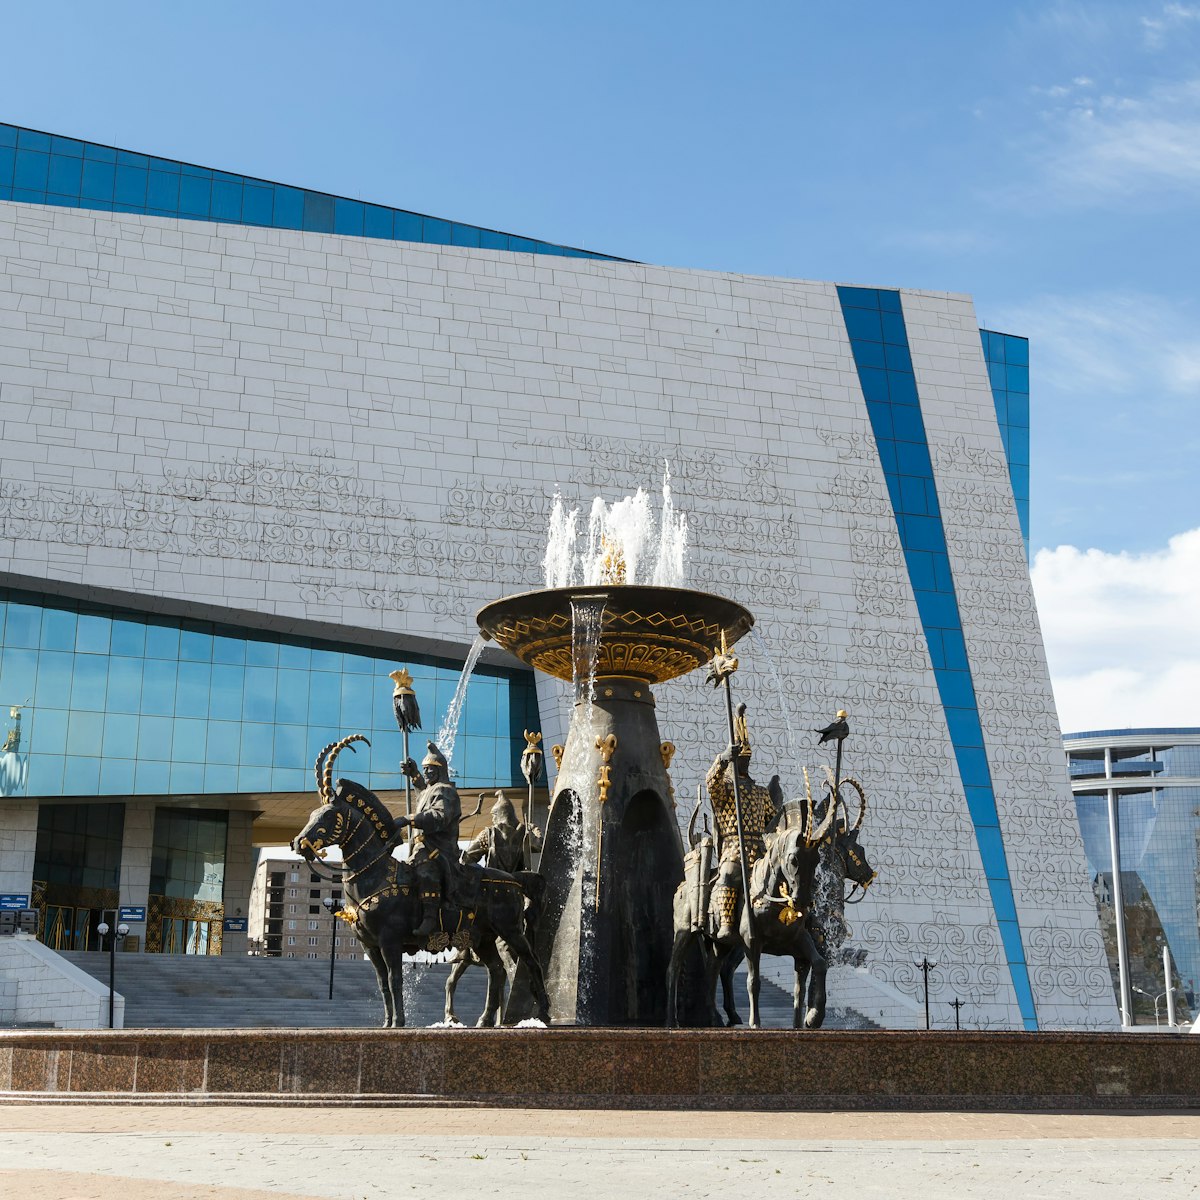 The fountain at the National Museum of Republic of Kazakhstan.